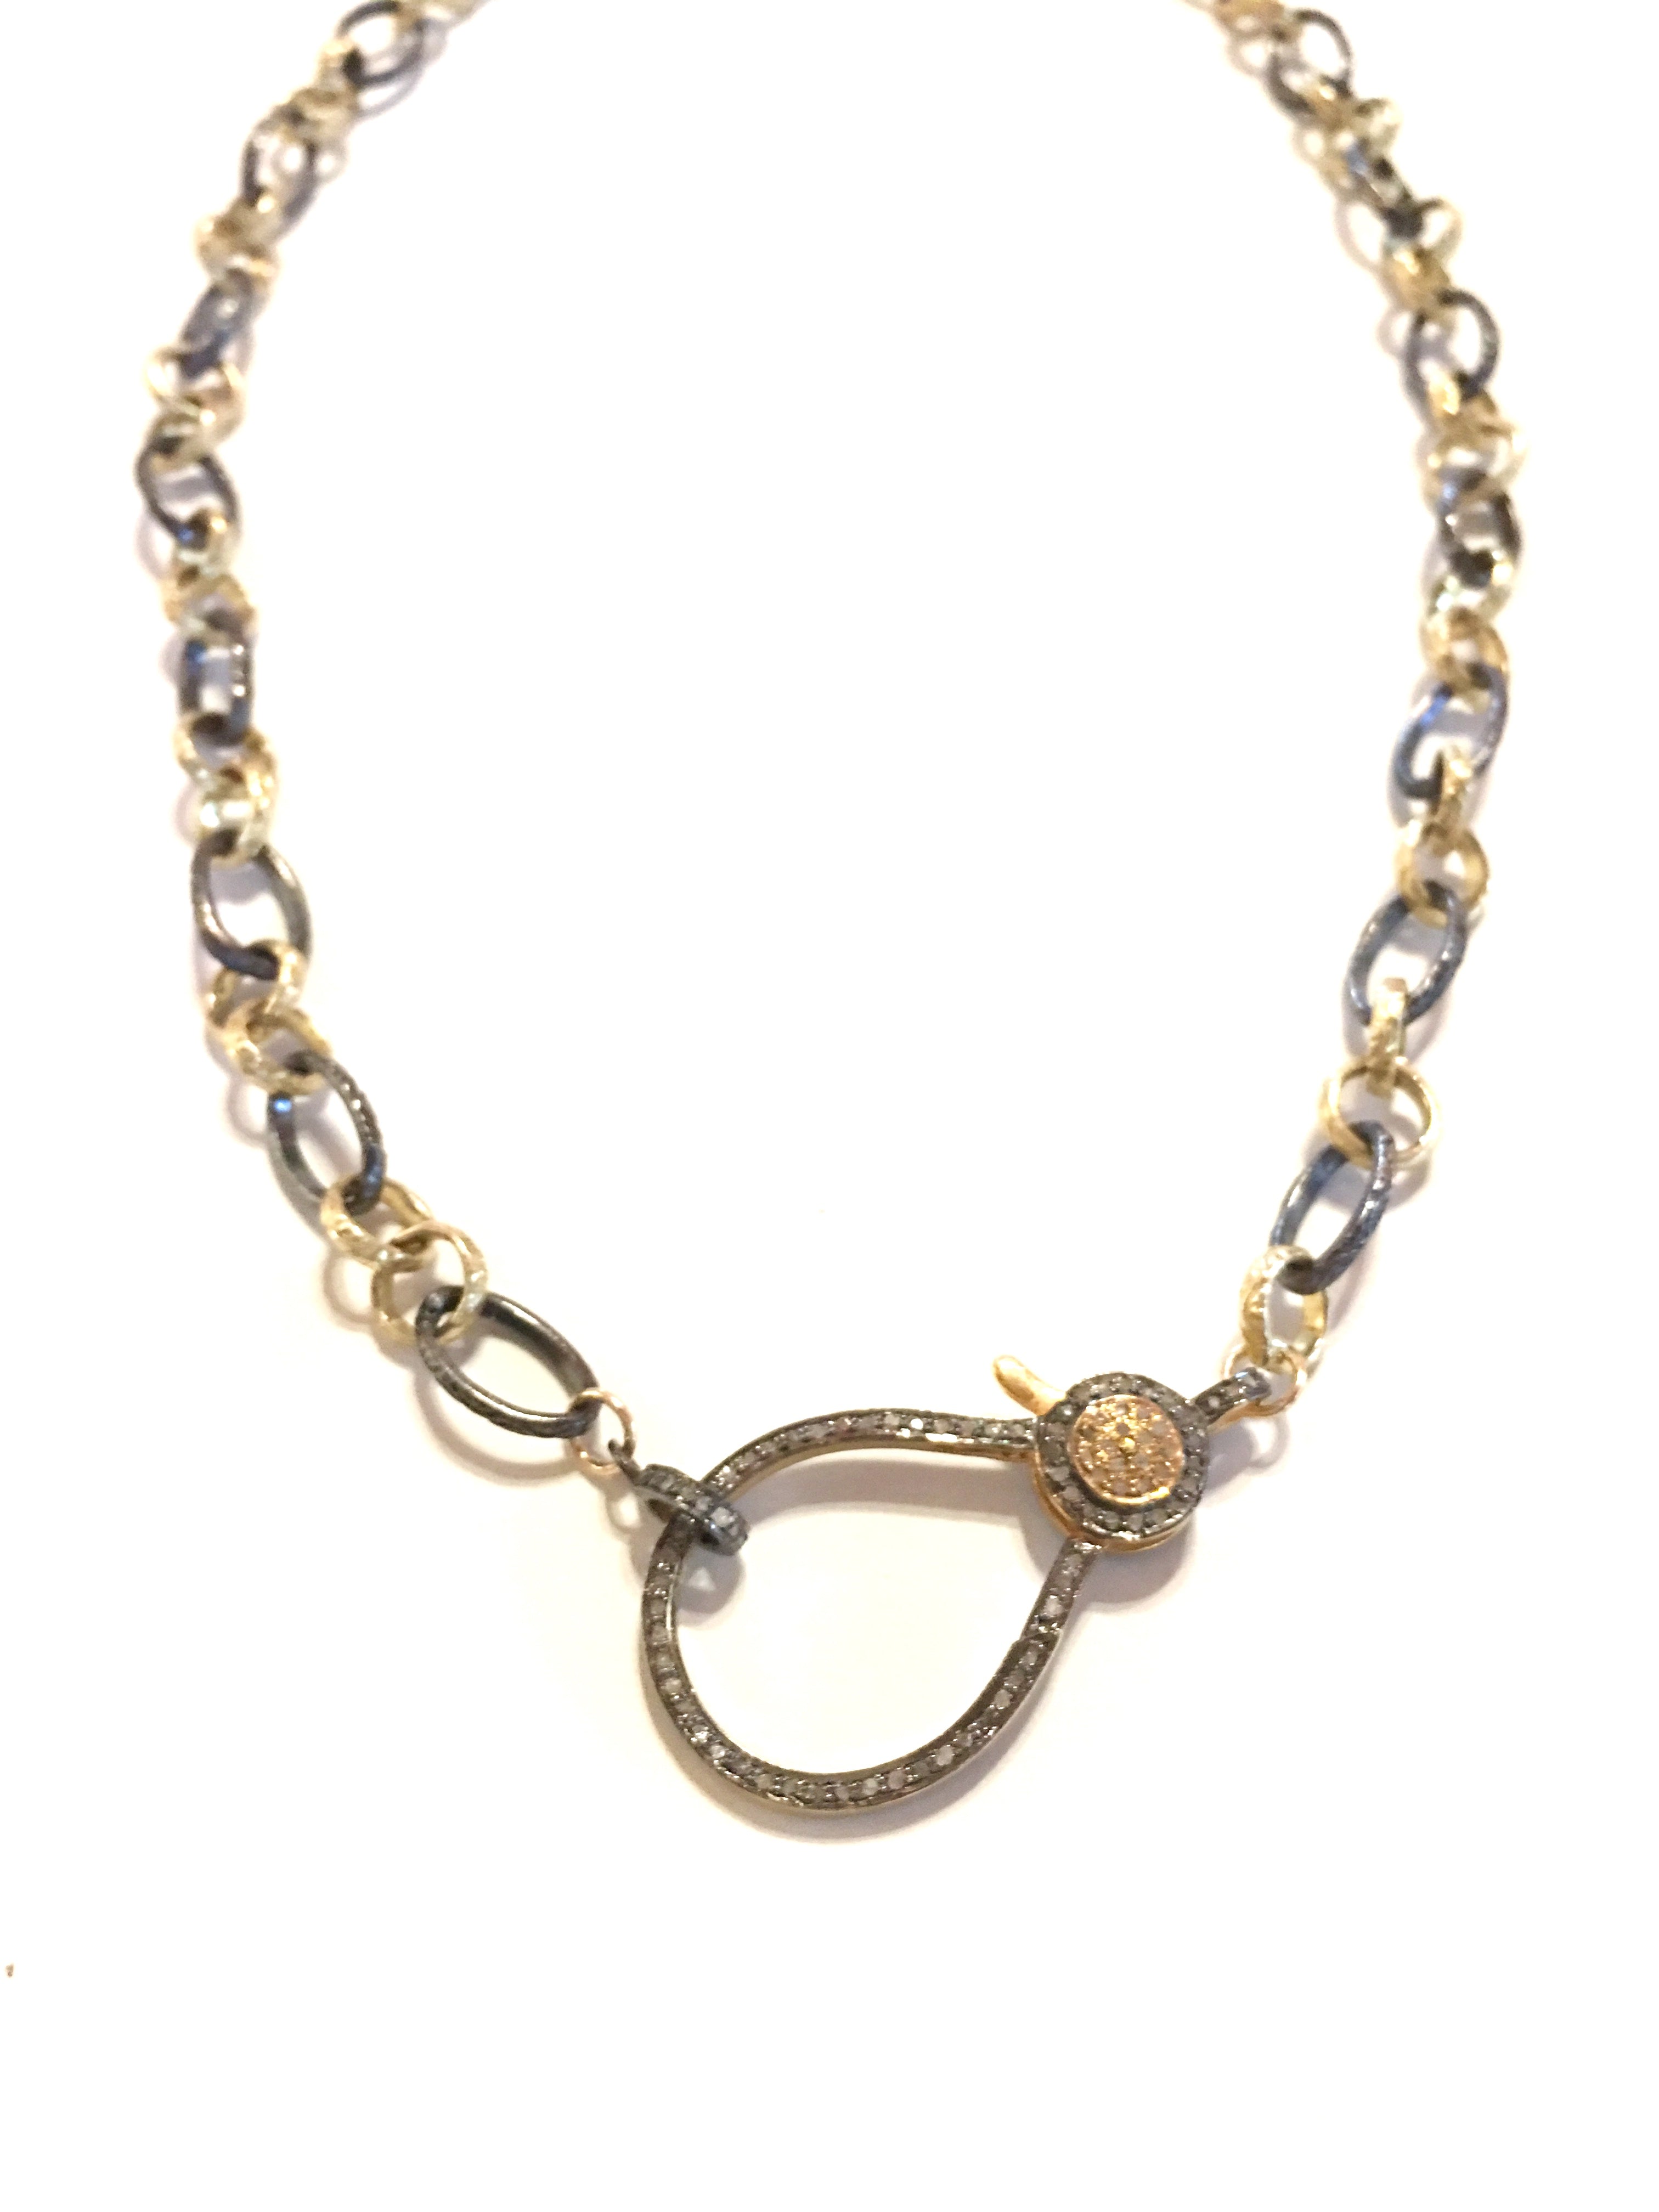 Francie-O - necklace with handmade sterling silver and vermeil link chain and diamond clasp